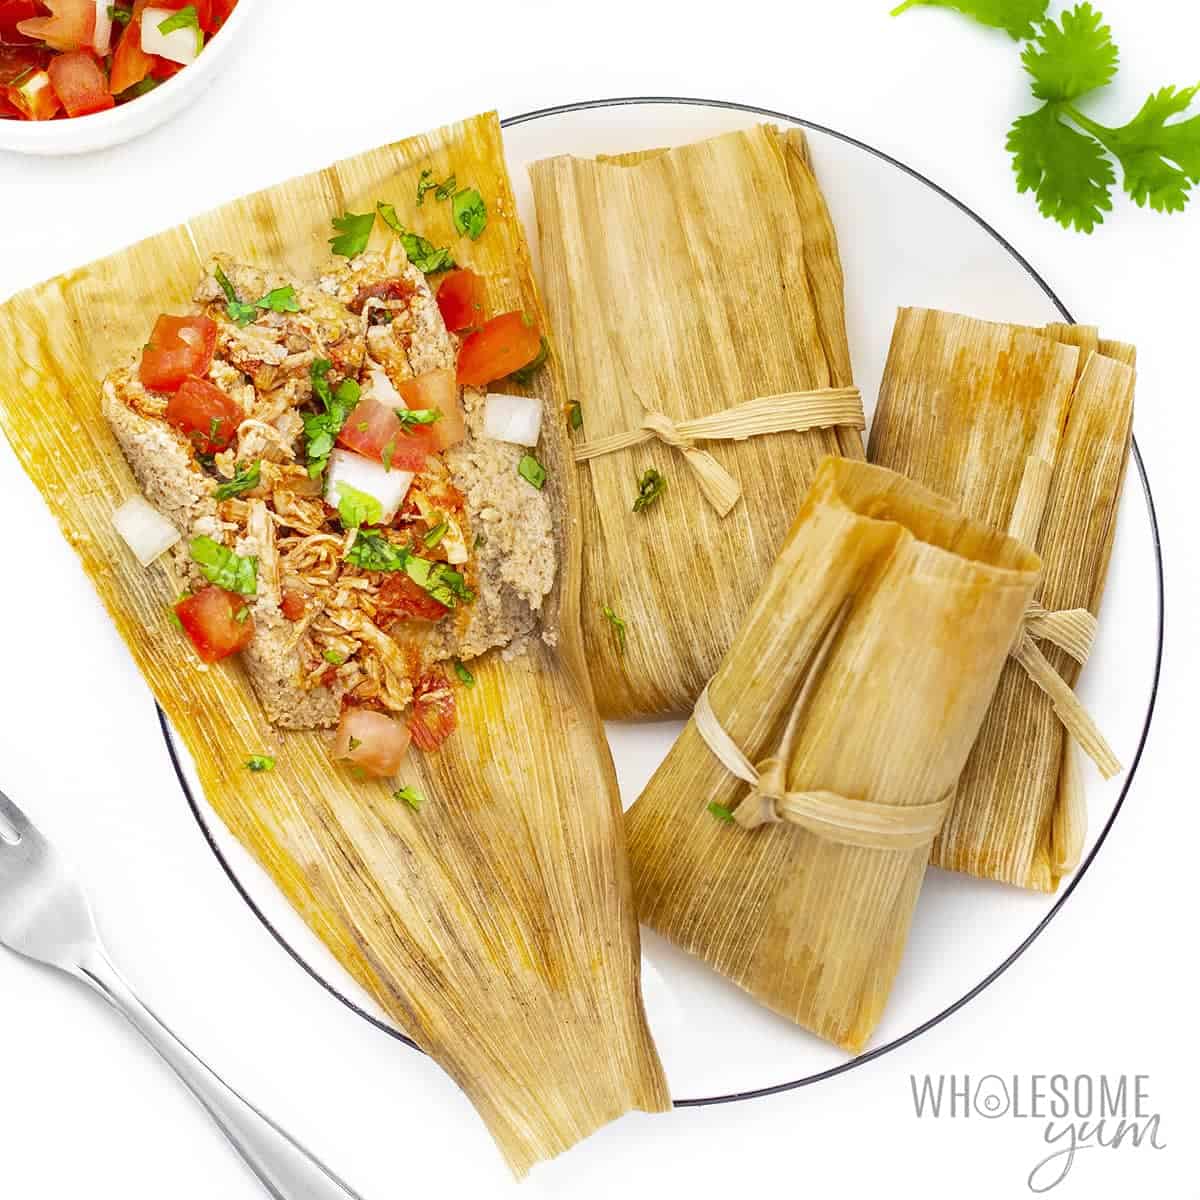 Keto tamales on a plate, one unwrapped.